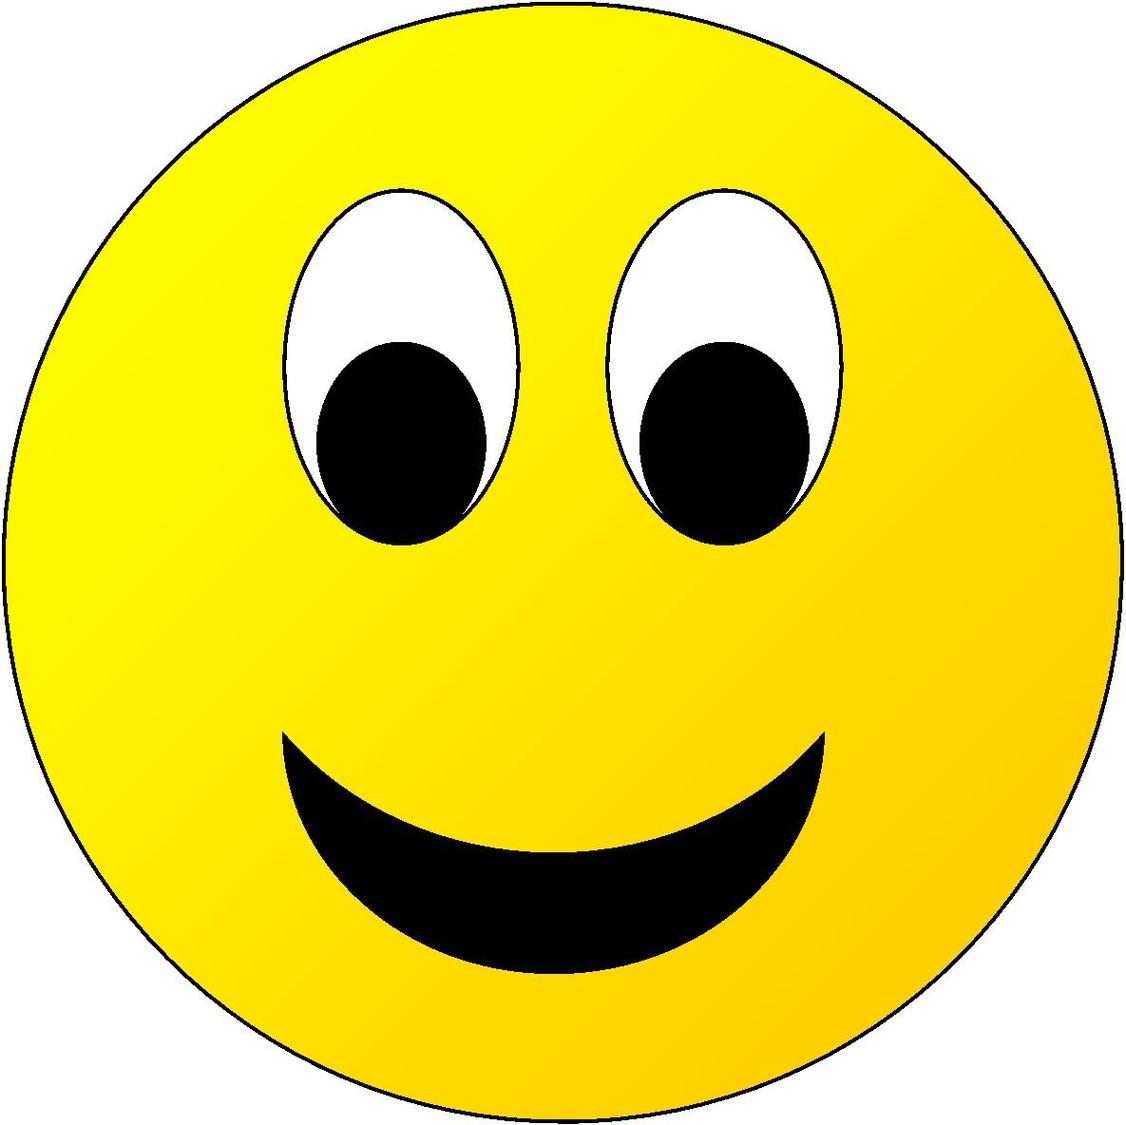 5 Animated Laughing Smileys Free Cliparts That You Can Download ...